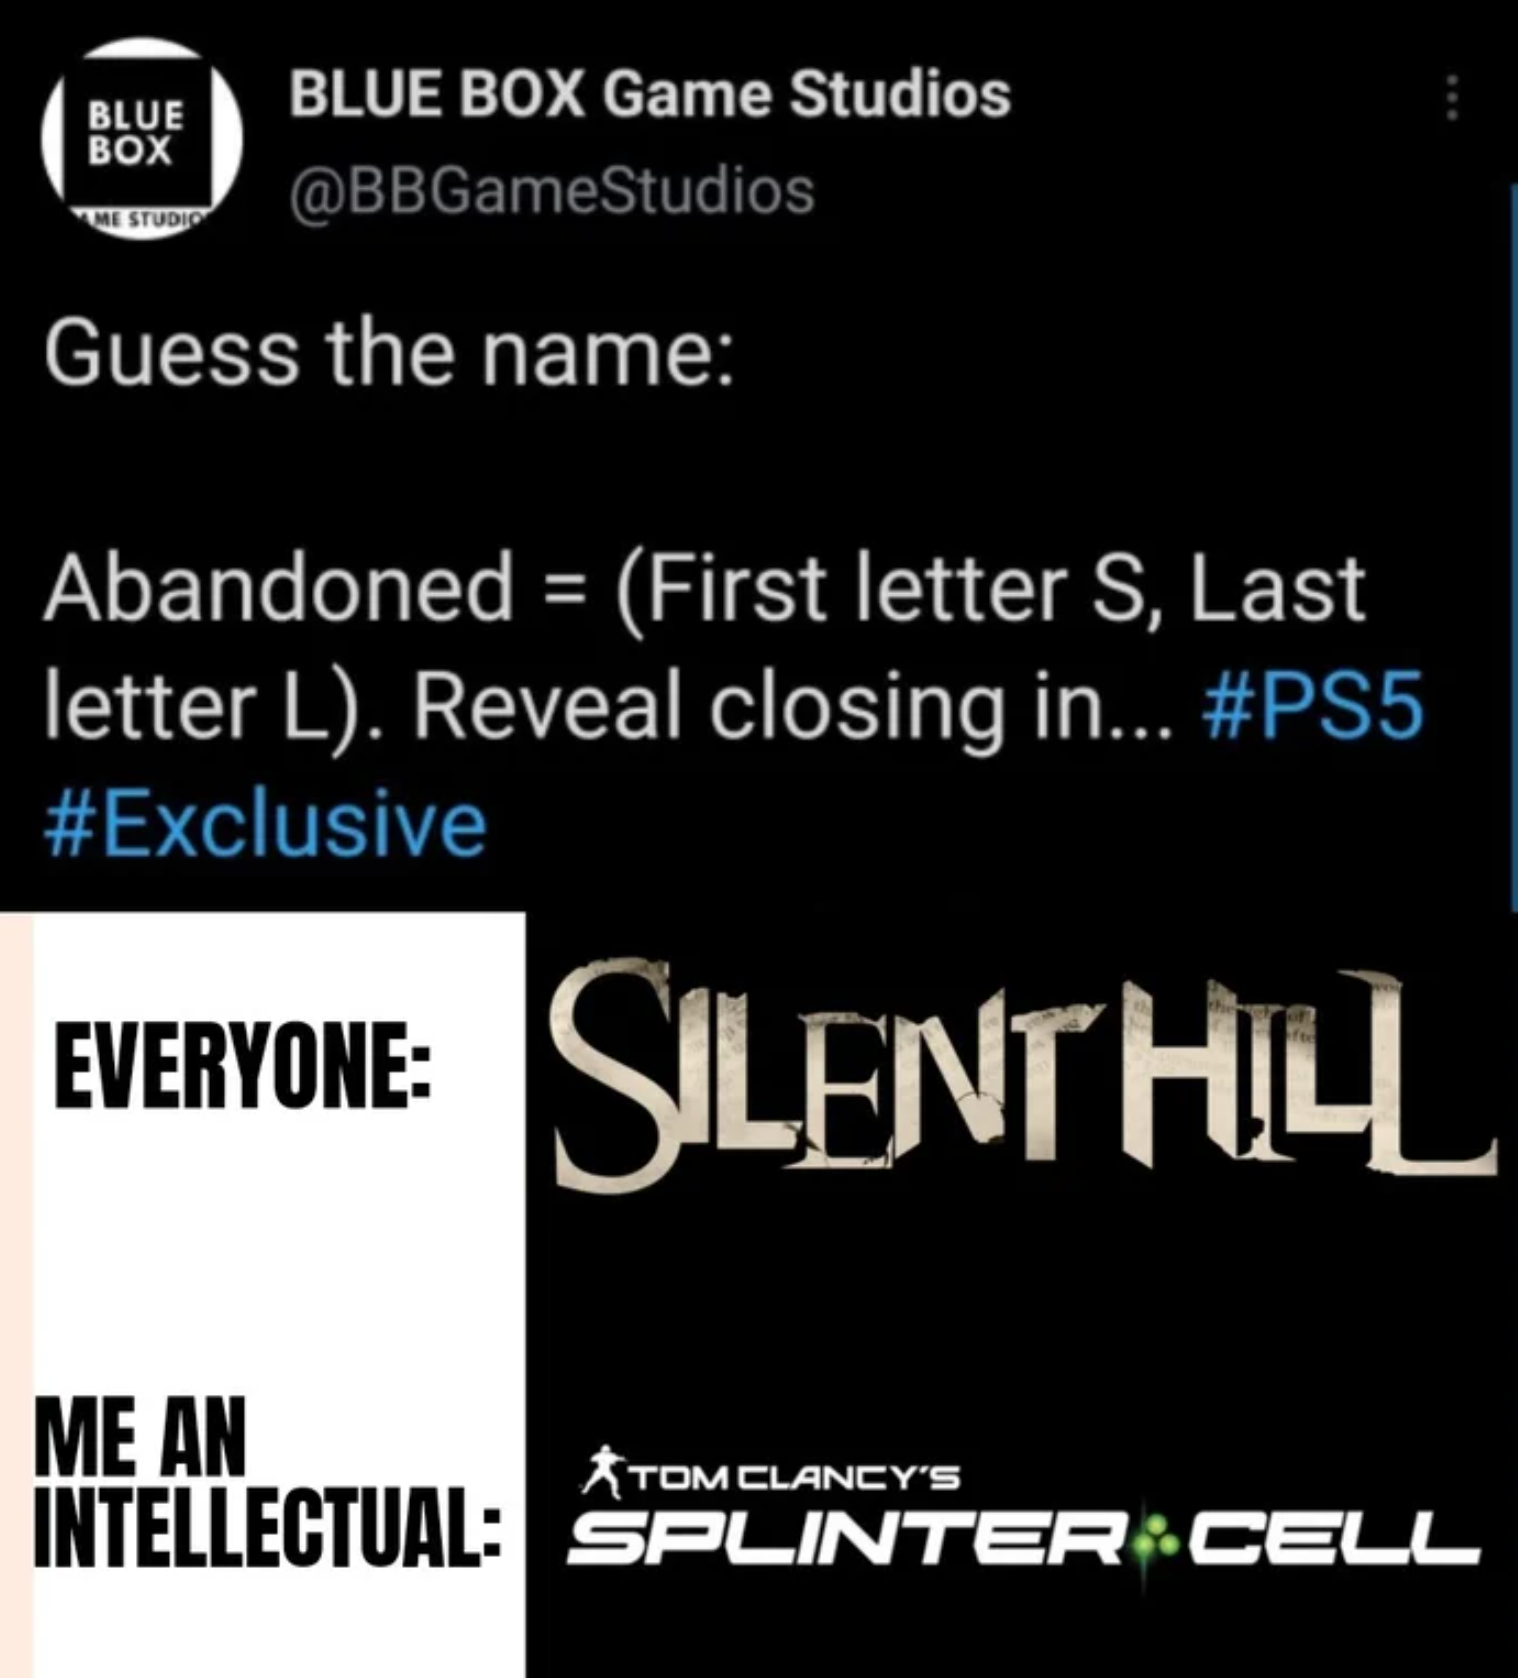 funny gaming memes - silent hill - Blue Box Blue Box Game Studios Guess the name Abandoned First letter S, Last letter L. Reveal closing in... Everyone Silent Hll Me An Tom Clancy'S Intellectual Splinter Cell